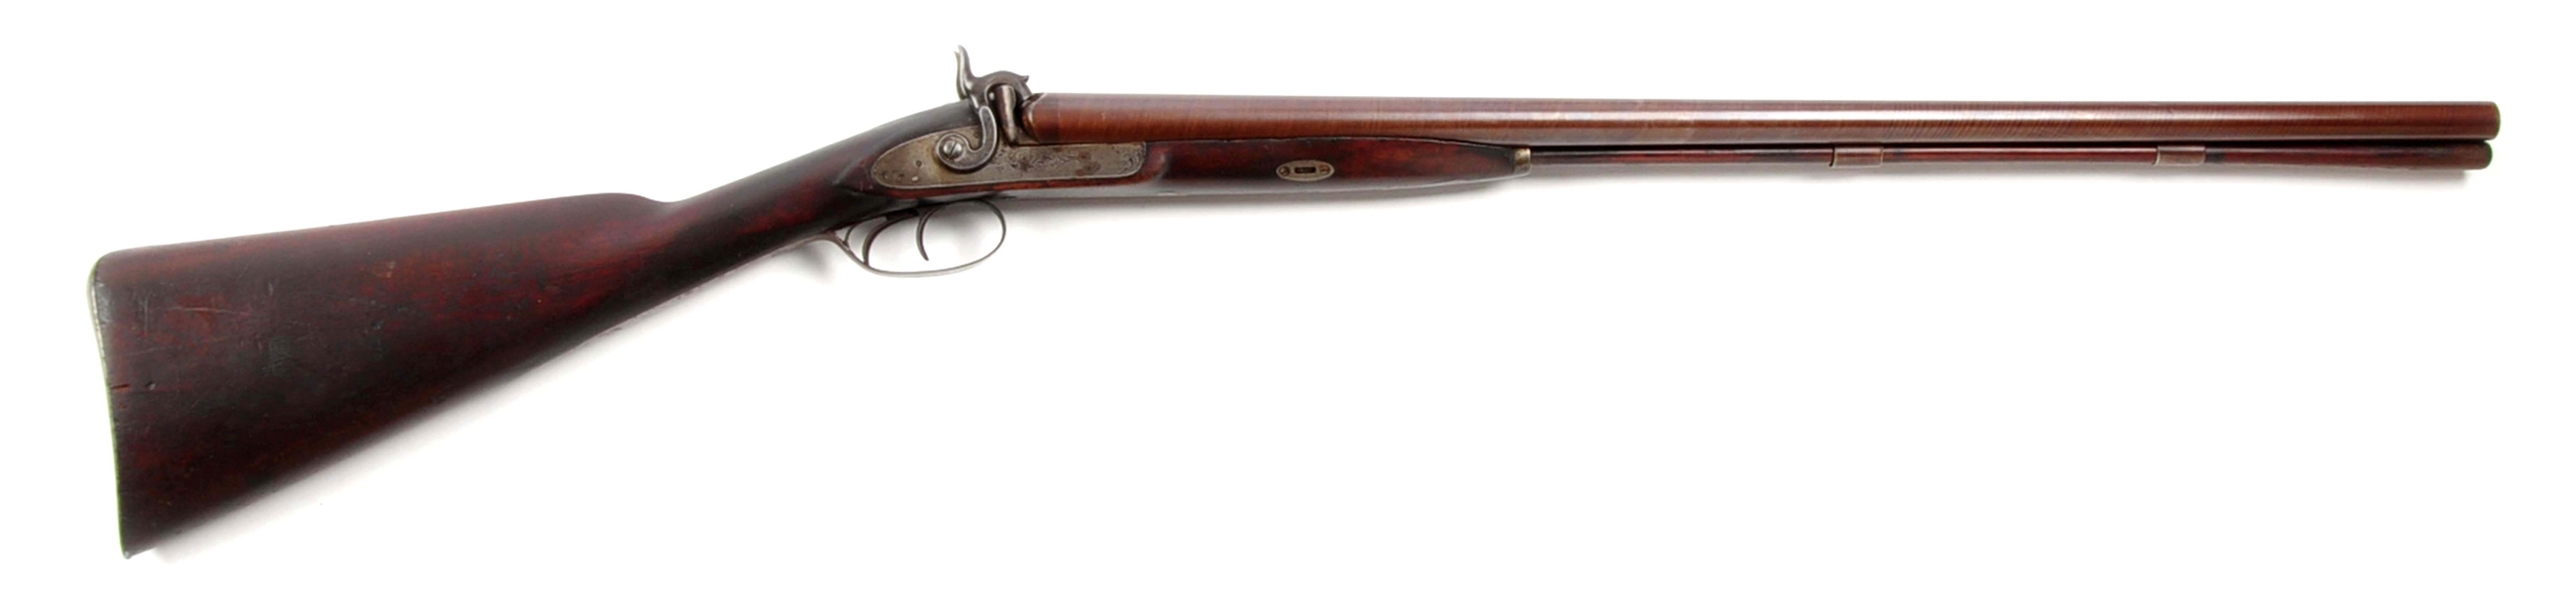 (A) PERCUSSION SIDE-BY-SIDE SHOTGUN BY ETHAN ALLEN.